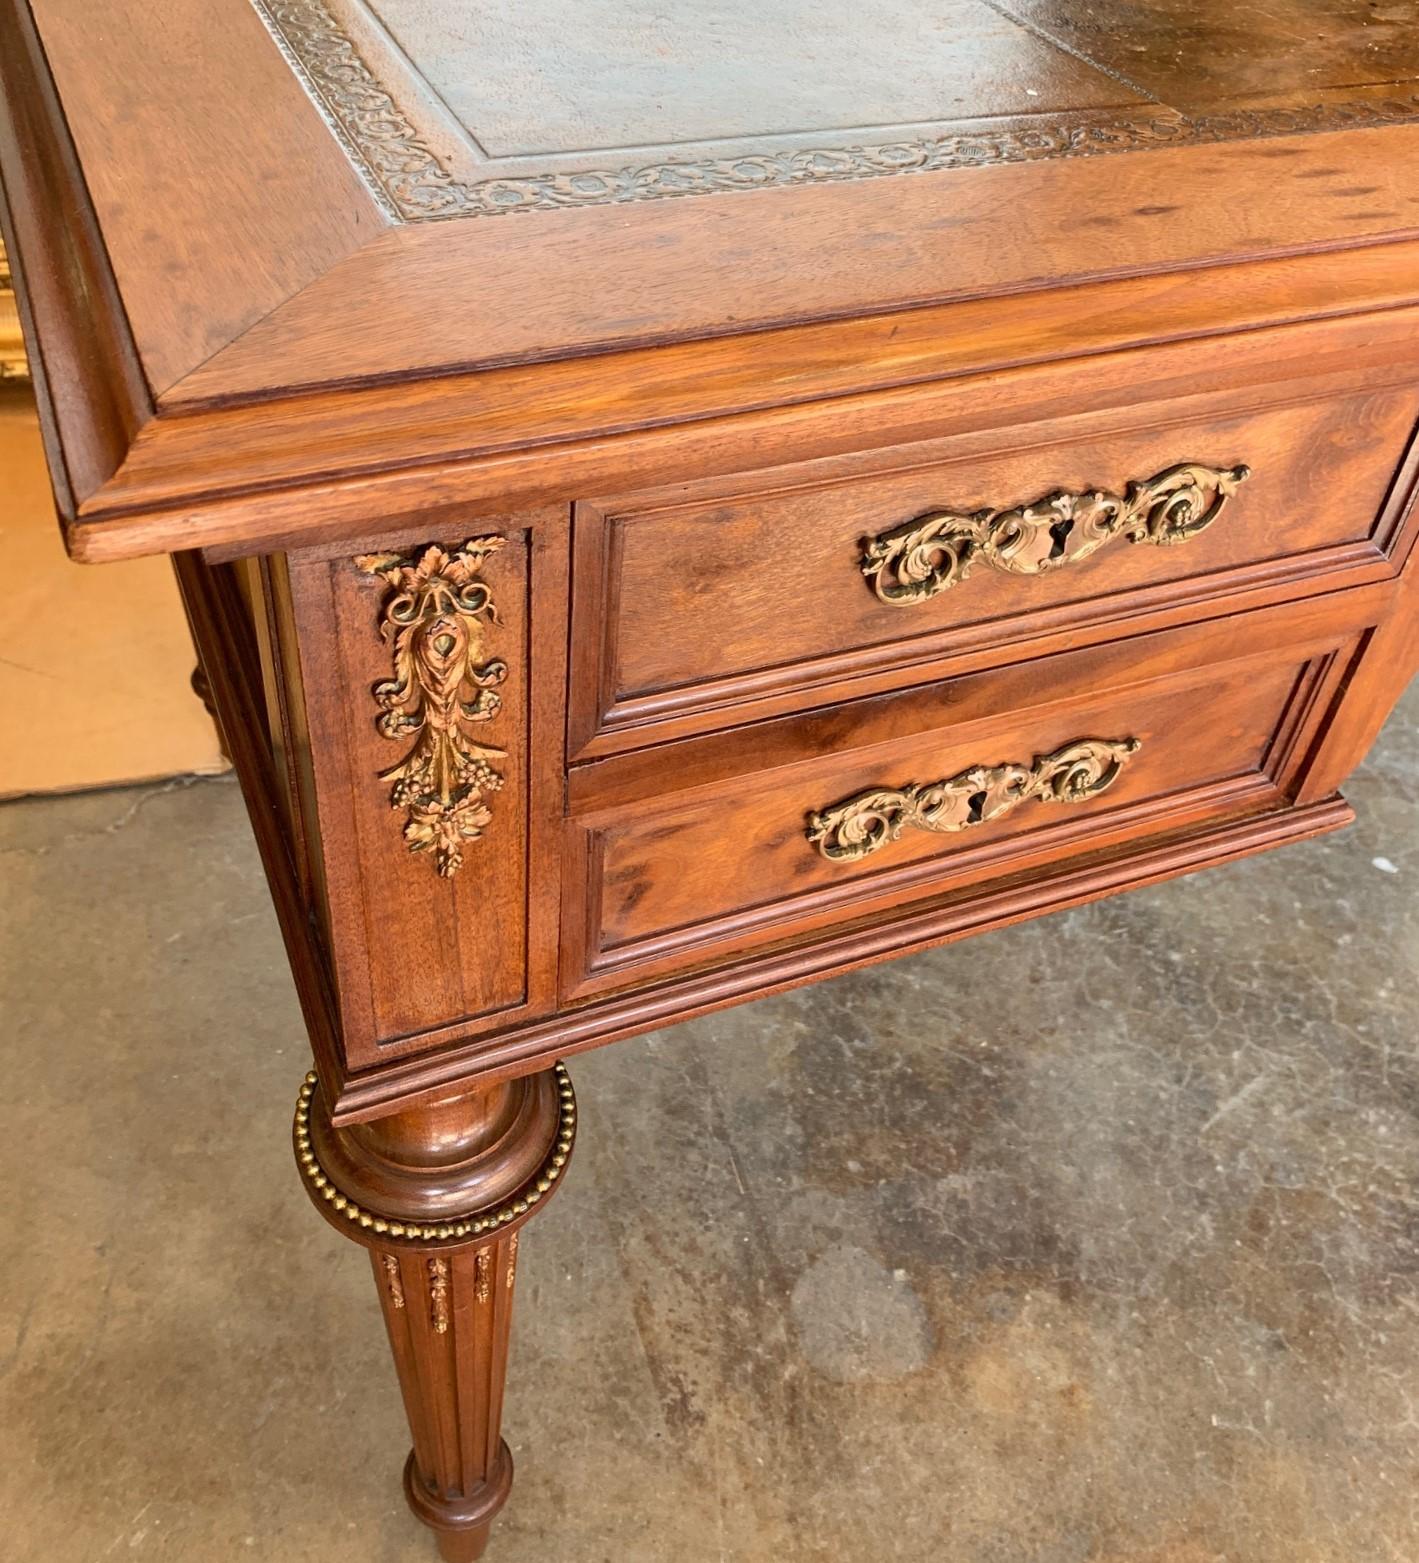 Handsome 19th century French Napoleon III writing table or desk crafted of fine plum mahogany and having a tooled leather top. Superbly appointed with grape cluster and leaf cast bronze appliques, and foliate inspired bronze escutcheons. The entire